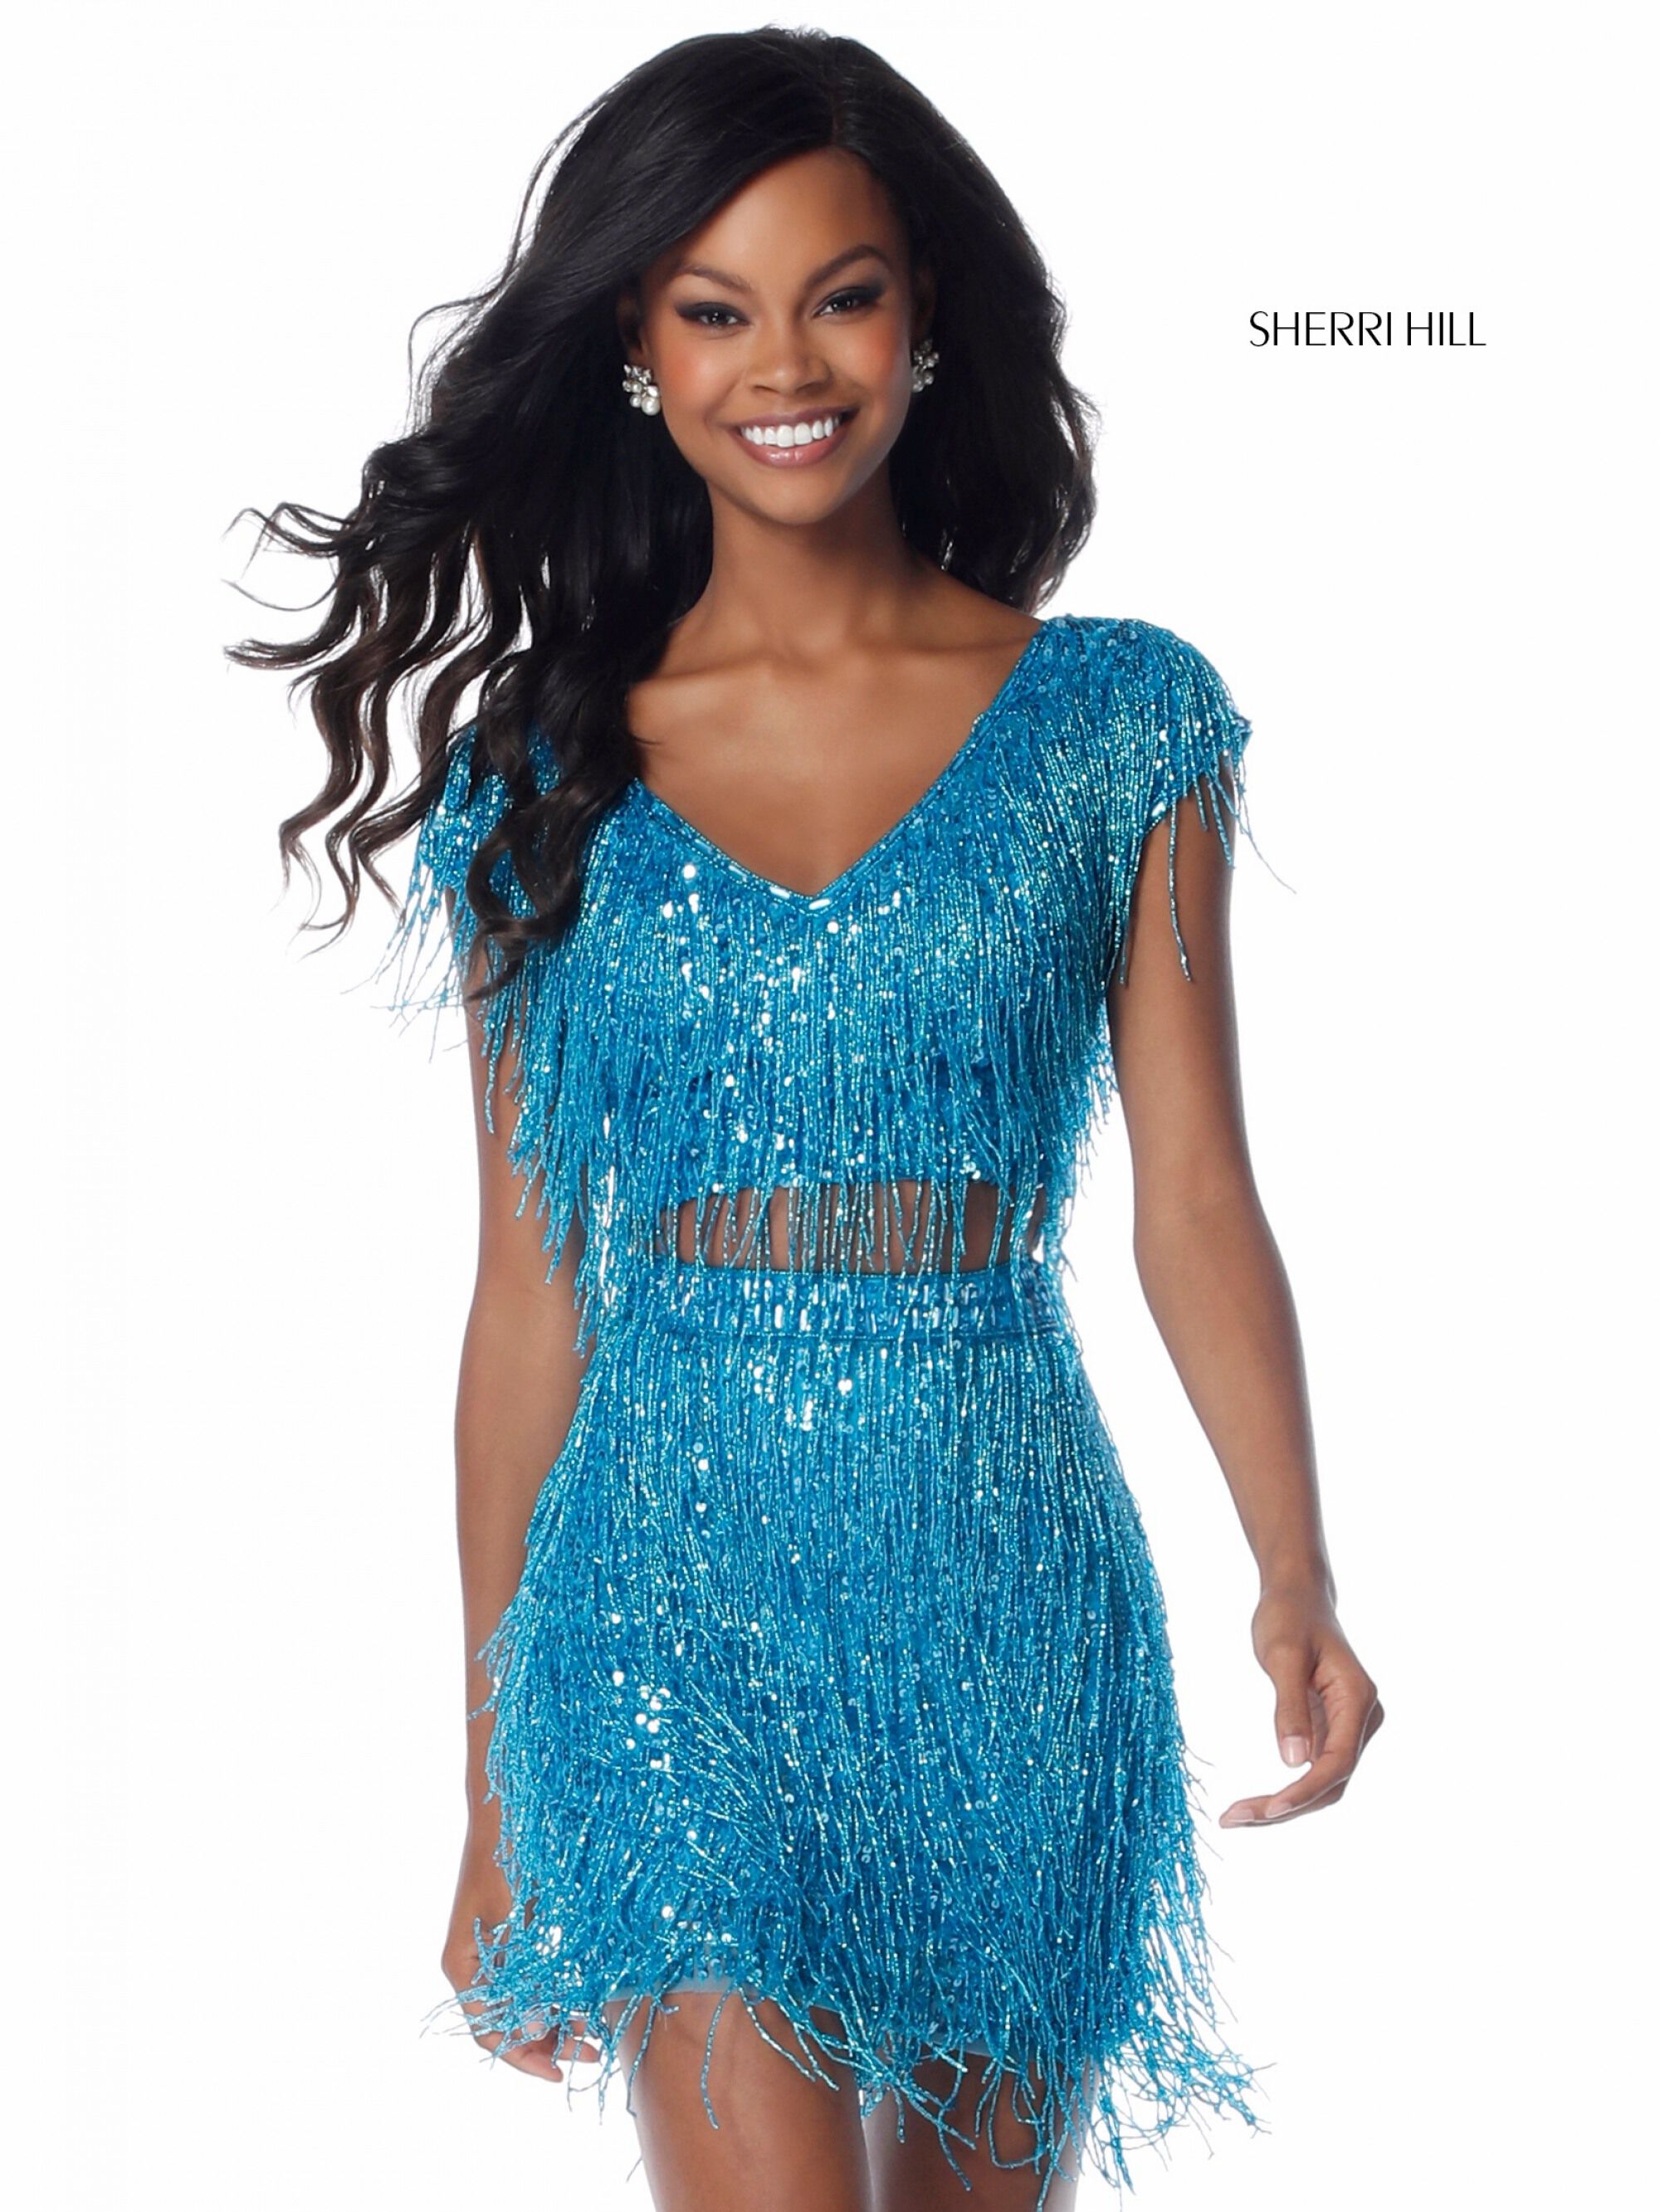 style № 51781 designed by SherriHill